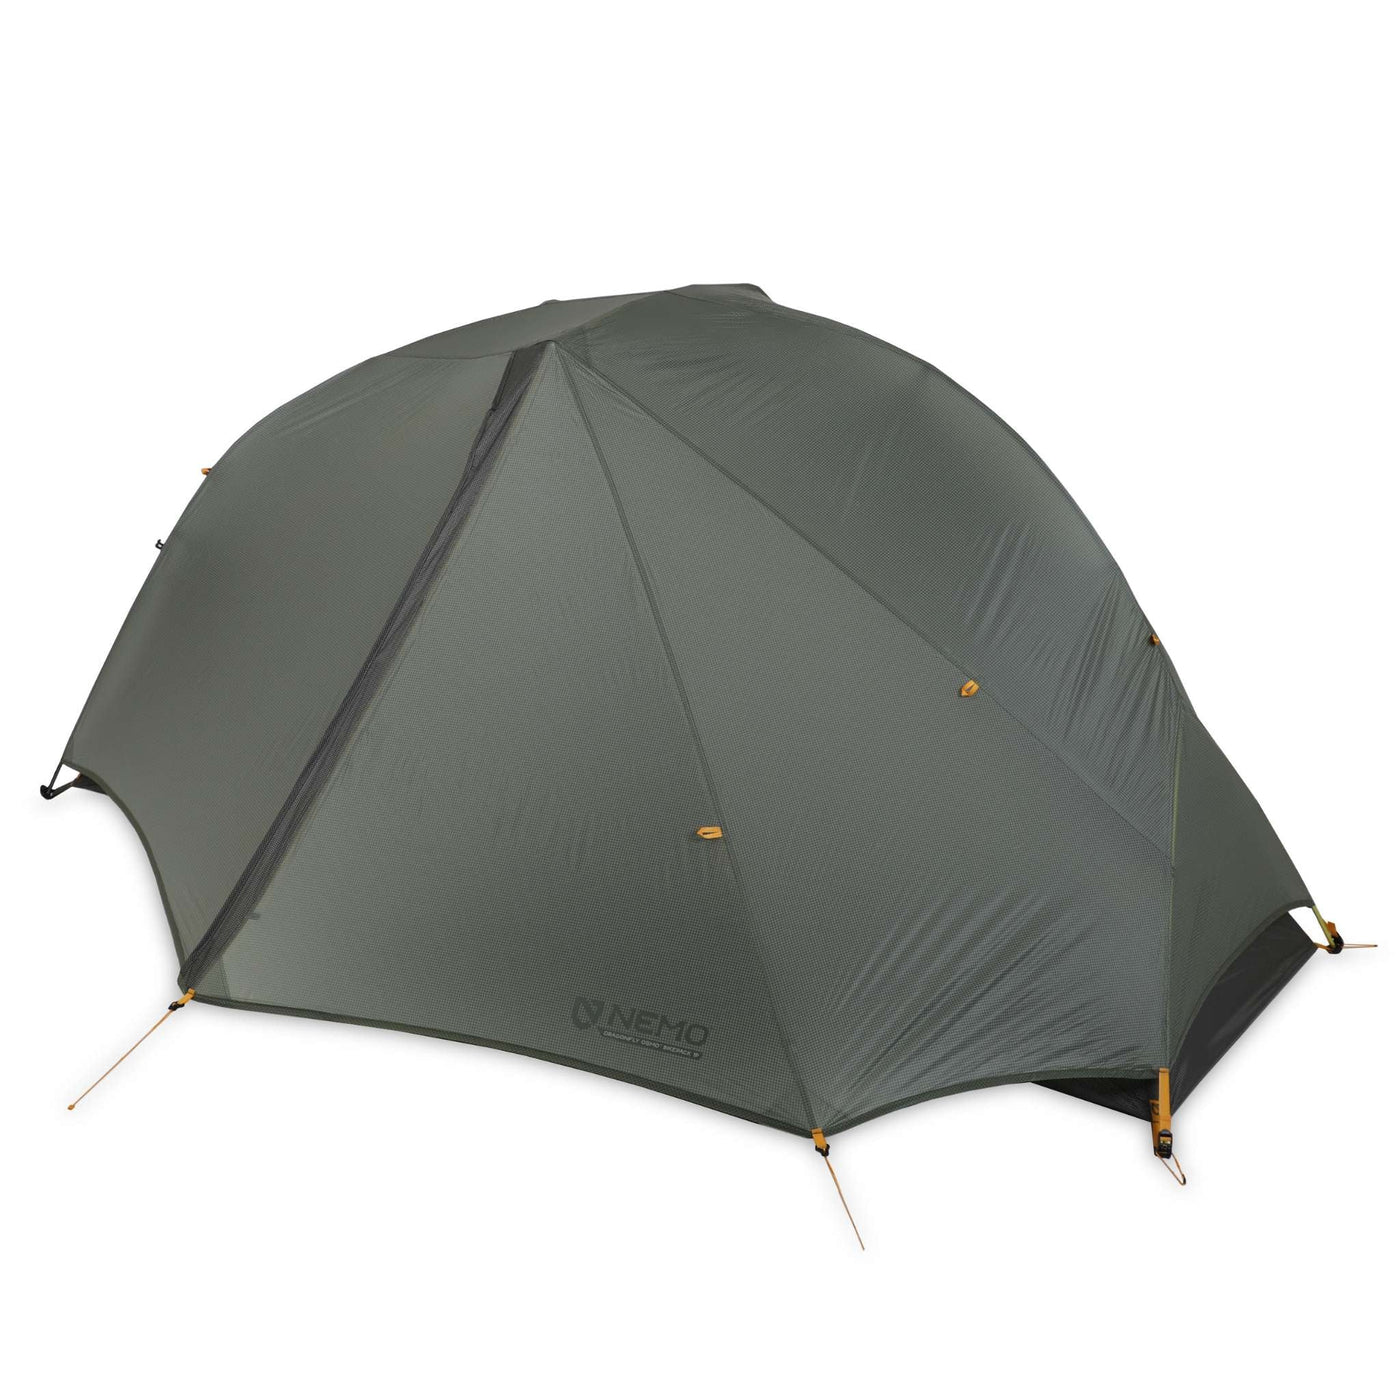 Nemo Dragonfly Bikepack 1 Person Tent